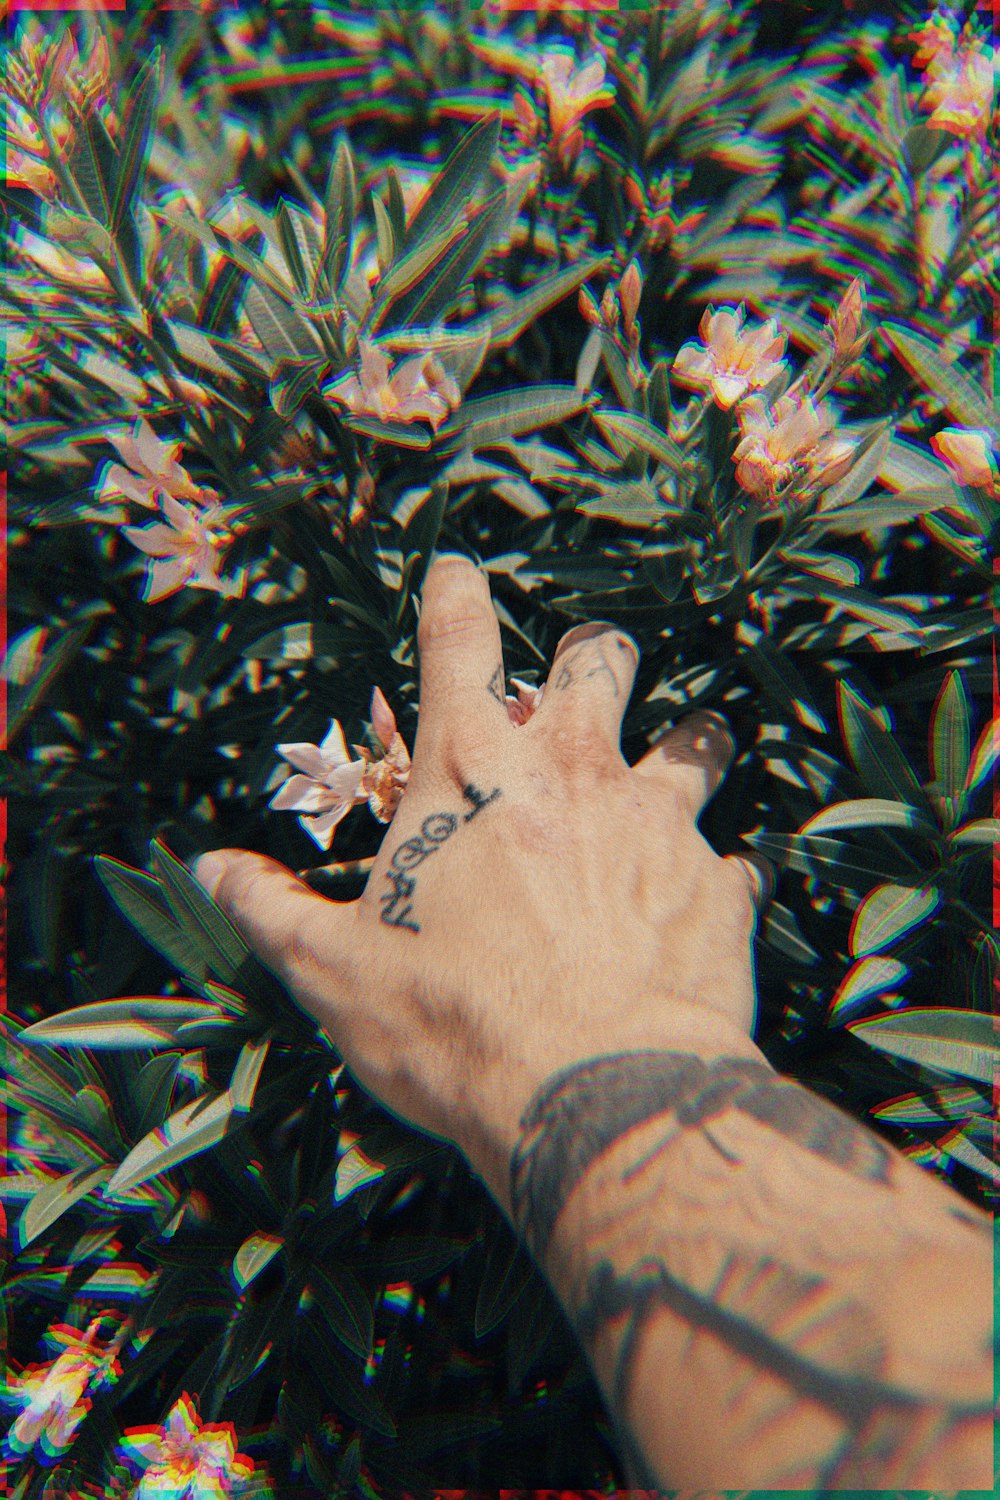 person with black arm tattoos touching flowering hedge plant